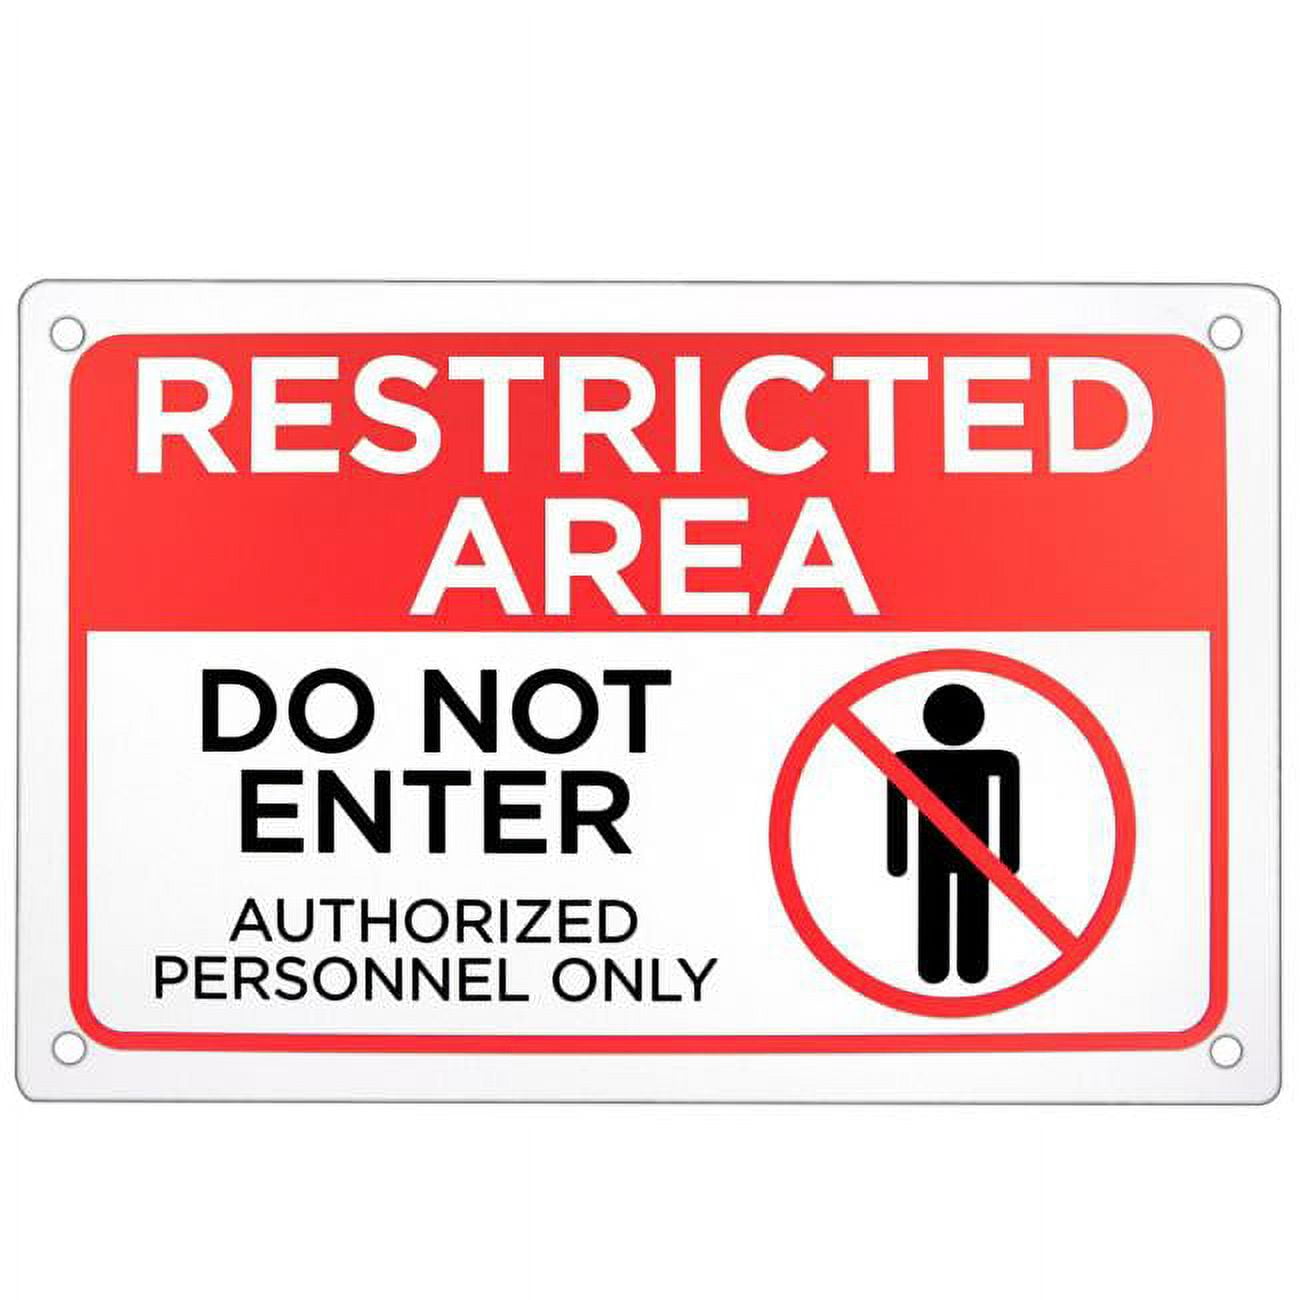 Isgn-007 18 X 12 In. Restricted Area Do Not Enter Sign